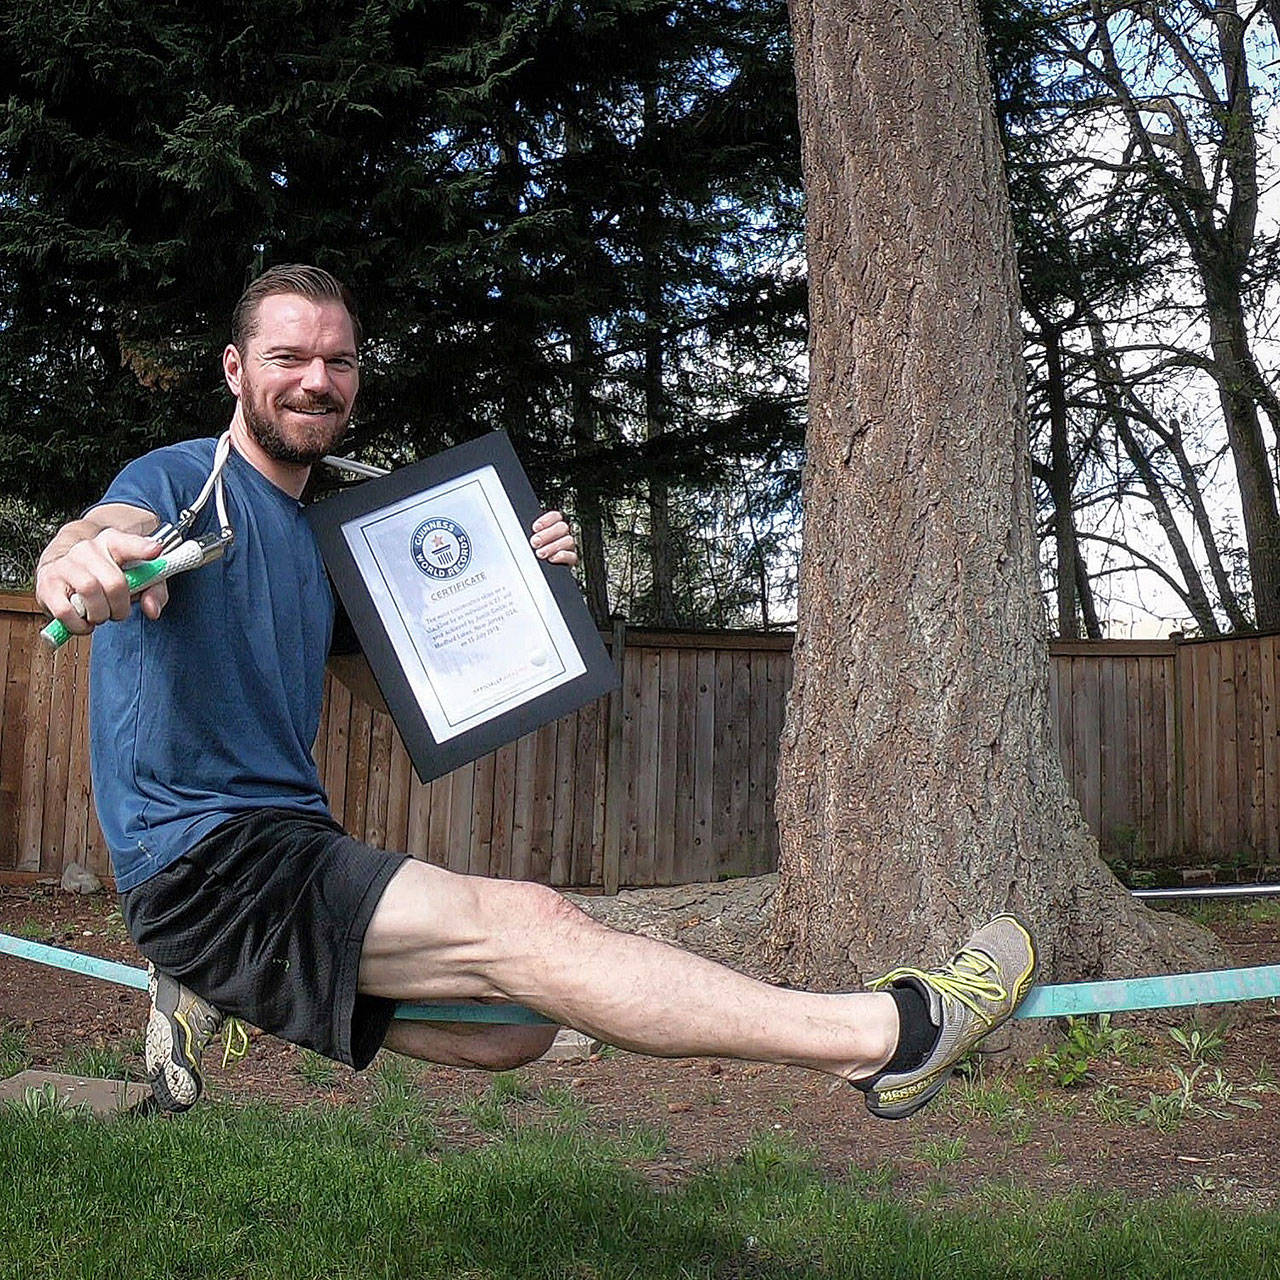 COURTESY PHOTO                                 Maple Valley’s Justin Gielski holds his Guinness World Record certificate for doing the “most consecutive skips over a rope on a slack line,” a feat he says helped him earn a return appearance on NBC’s “American Ninja Warrior.”